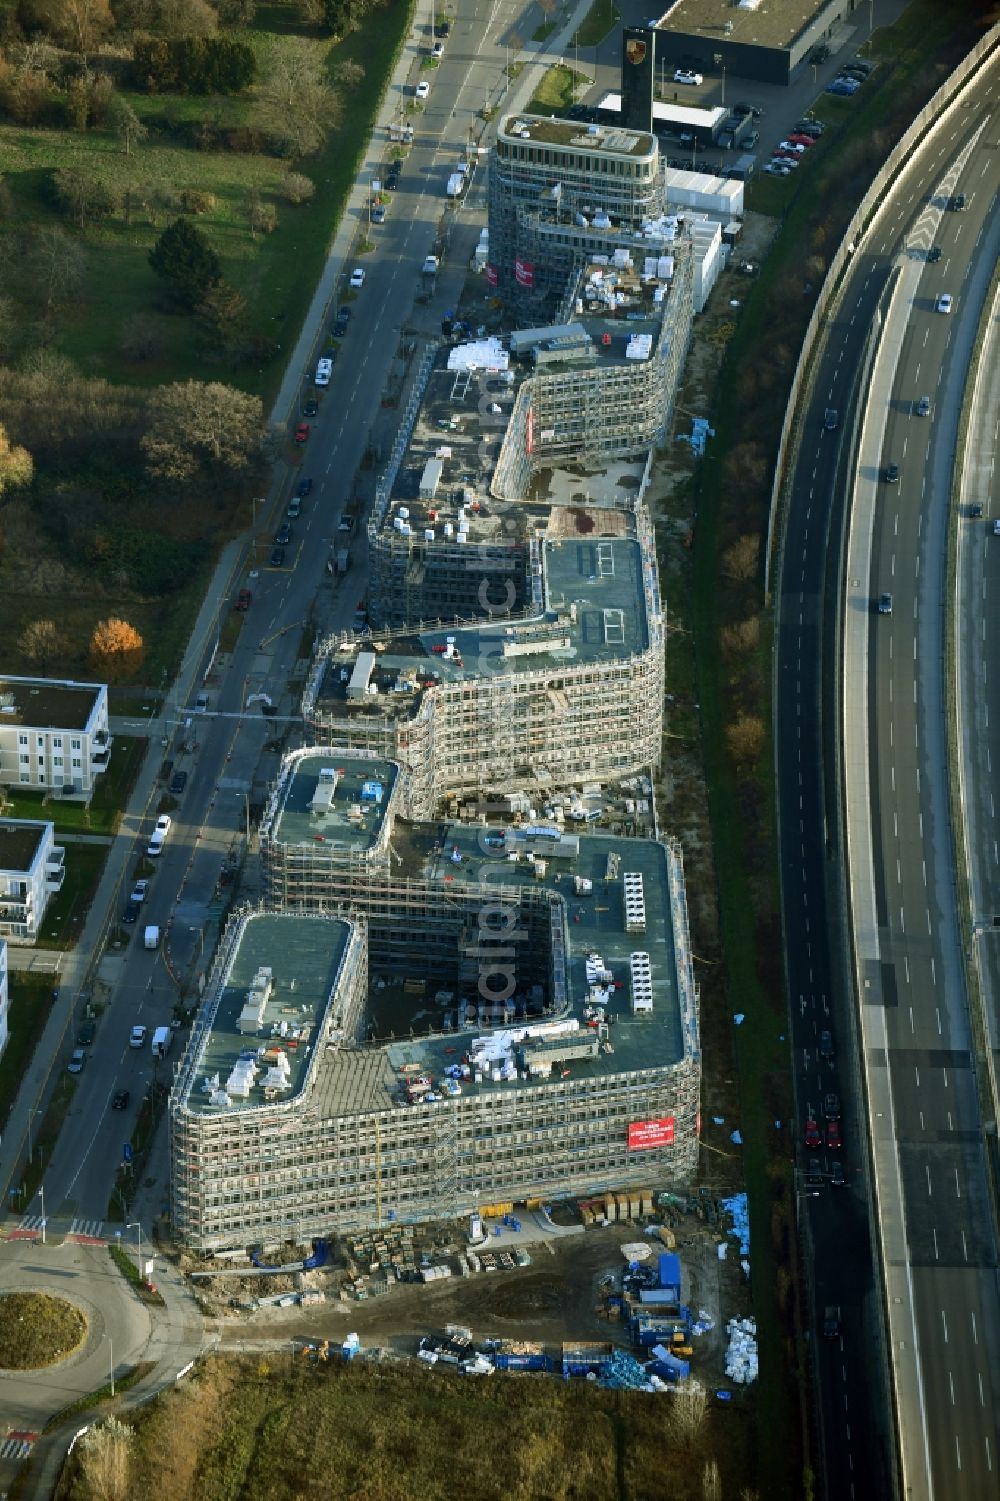 Berlin from above - Construction site to build a new office and commercial building Brain Box Berlin in Berlin - Adlershof, Germany